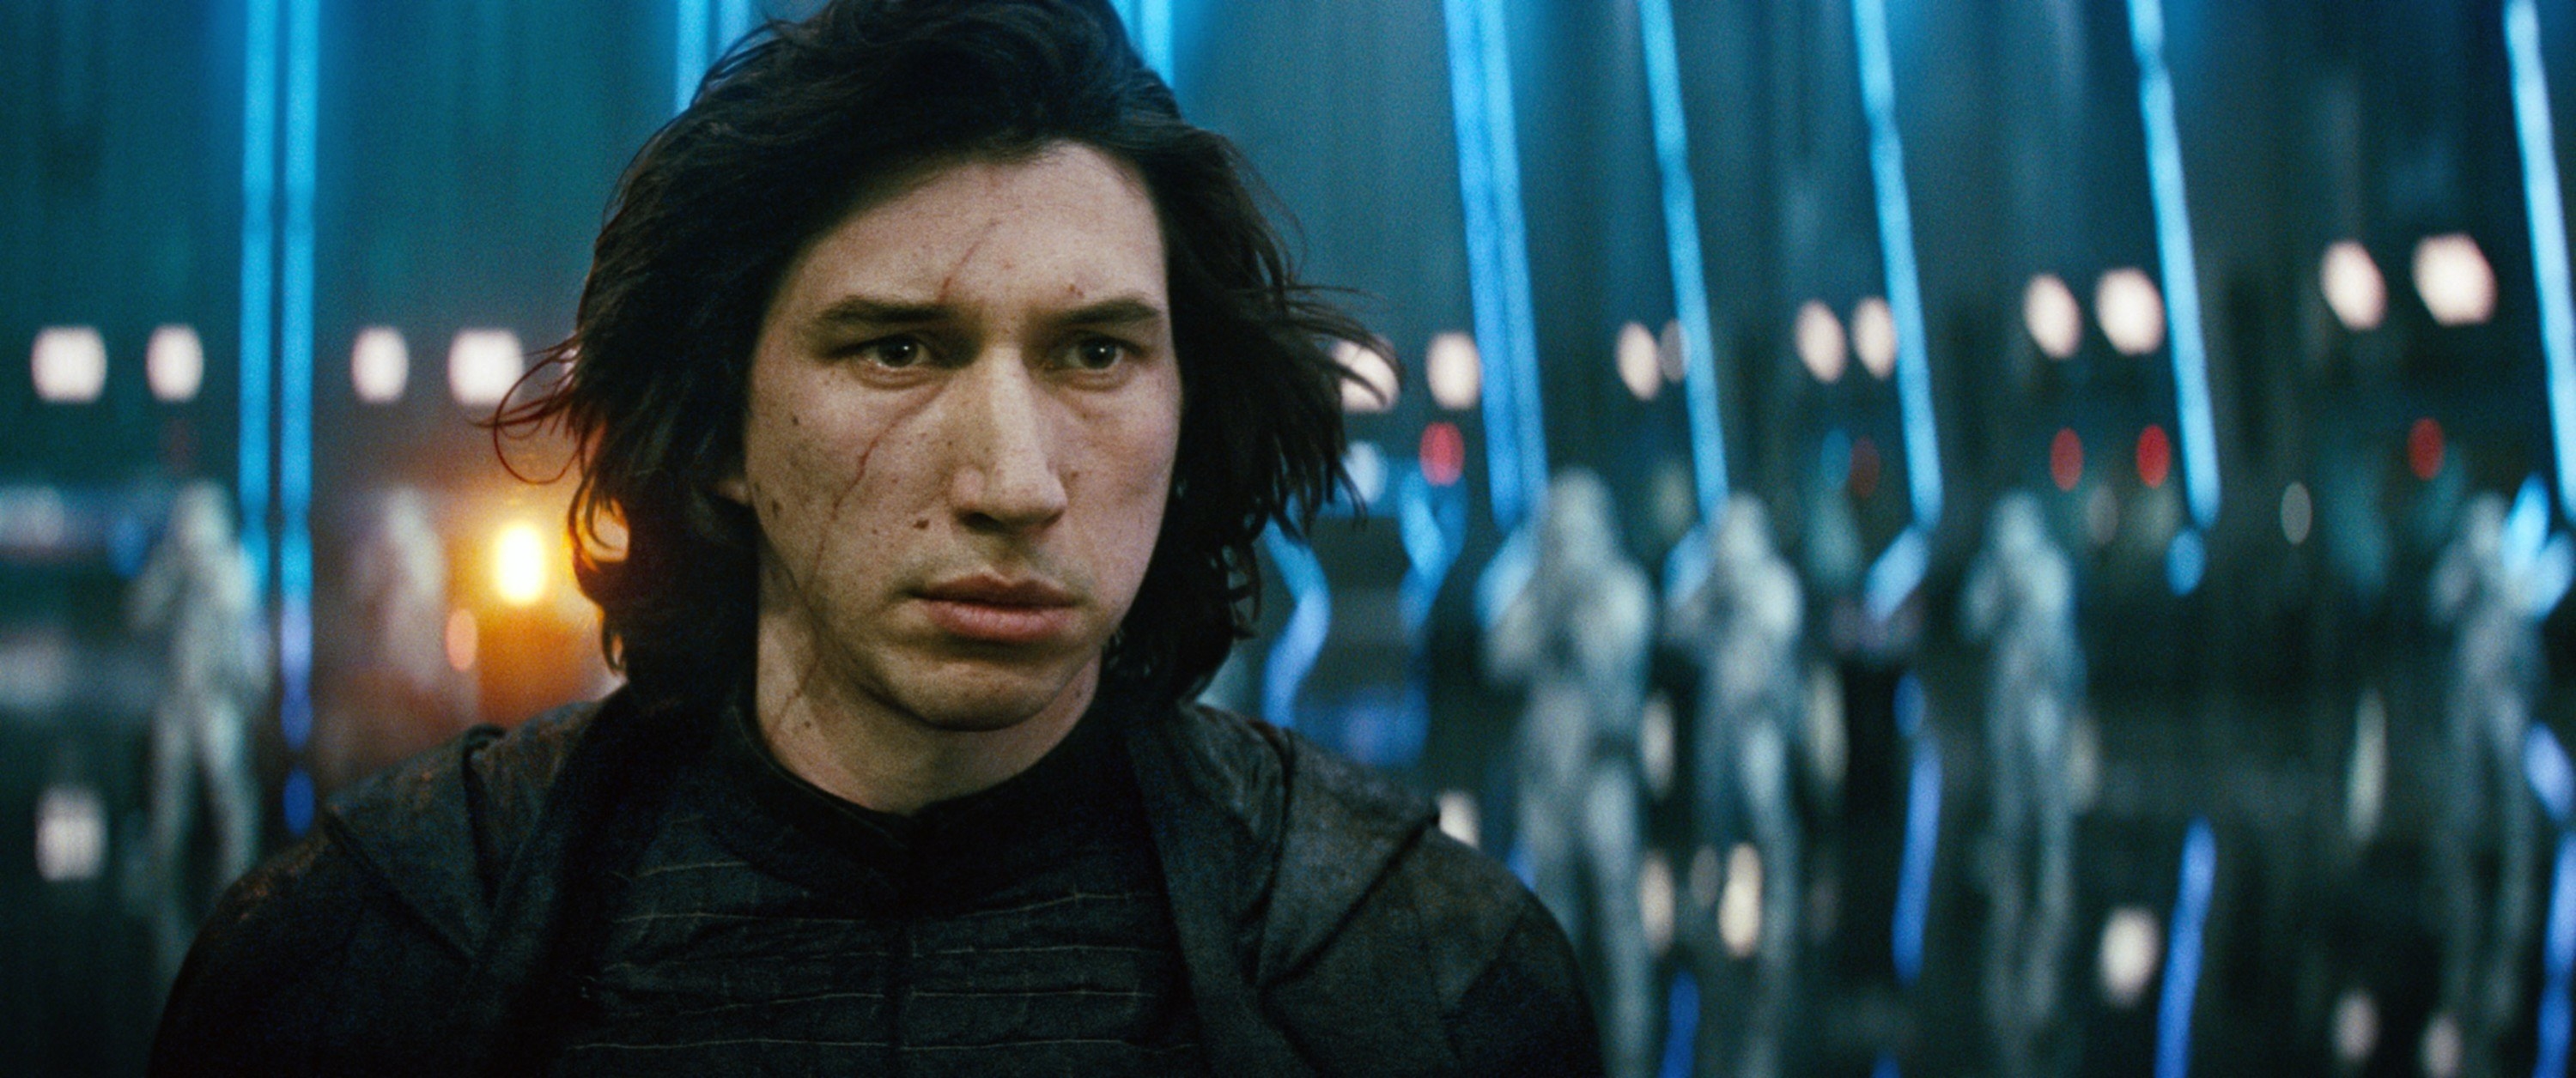 Driver with a scar on his face as Kylo Ren